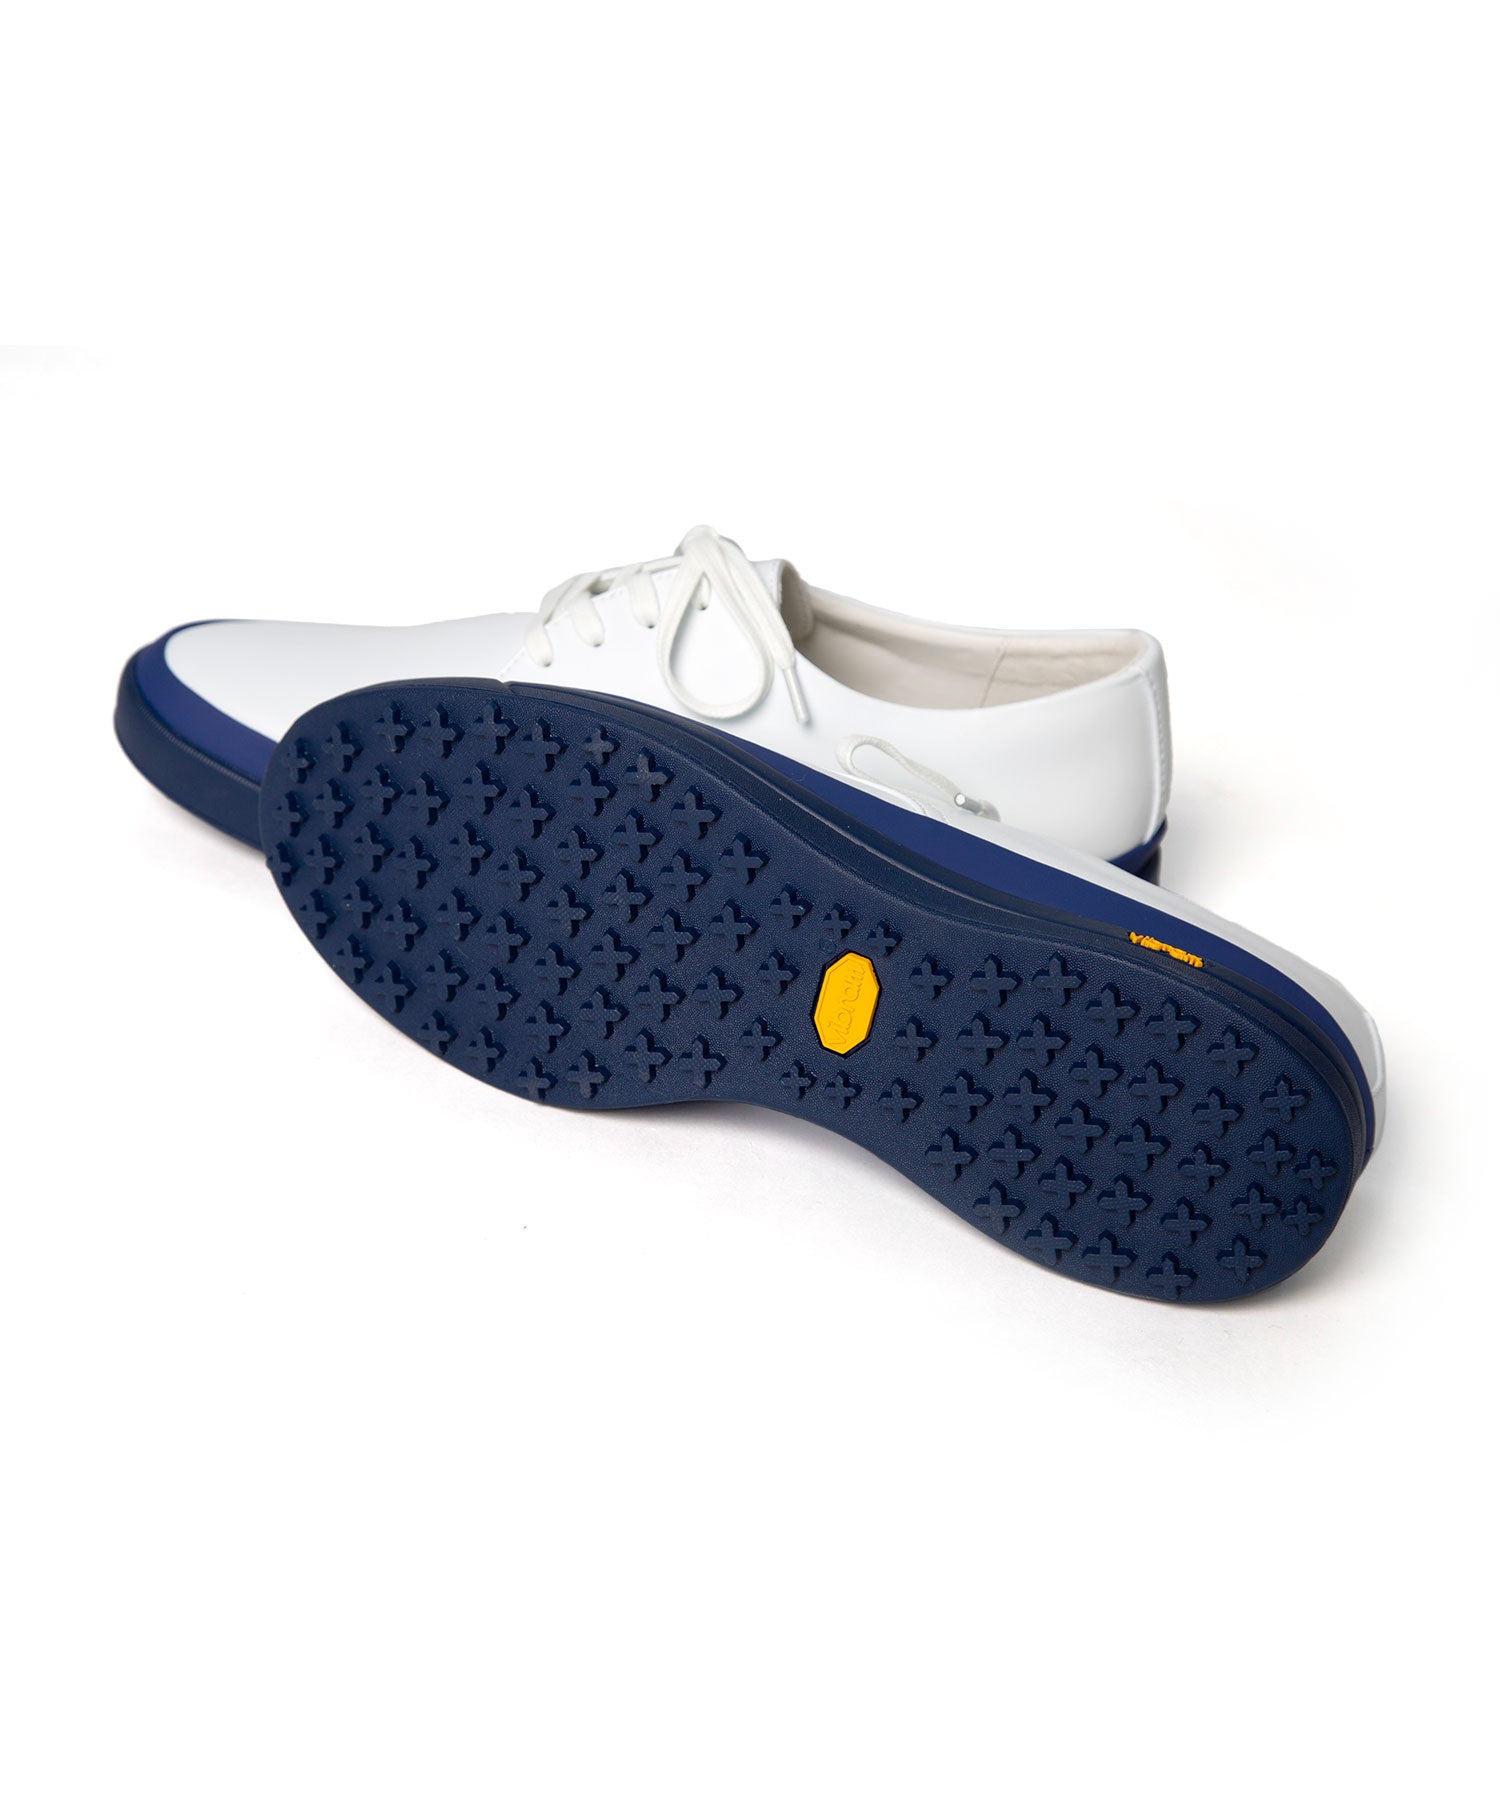 And The Cup Plain Toe Shoes Navy Sole